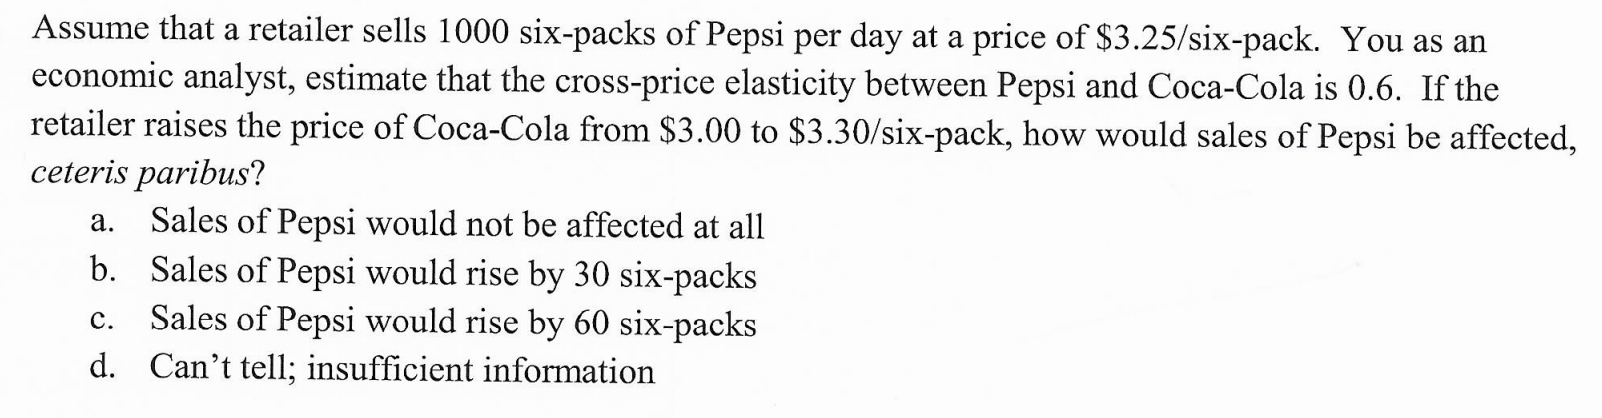 Assume that a retailer sells 1000 six-packs of Pepsi per day at a price of $3.25/six-pack. You as an
economic analyst, estimate that the cross-price elasticity between Pepsi and Coca-Cola is 0.6. If the
retailer raises the price of Coca-Cola from $3.00 to $3.30/six-pack, how would sales of Pepsi be affected,
ceteris paribus?
Sales of Pepsi would not be affected at all
Sales of Pepsi would rise by 30 six-packs
Sales of Pepsi would rise by 60 six-packs
а.
b.
с.
d. Can't tell; insufficient information
